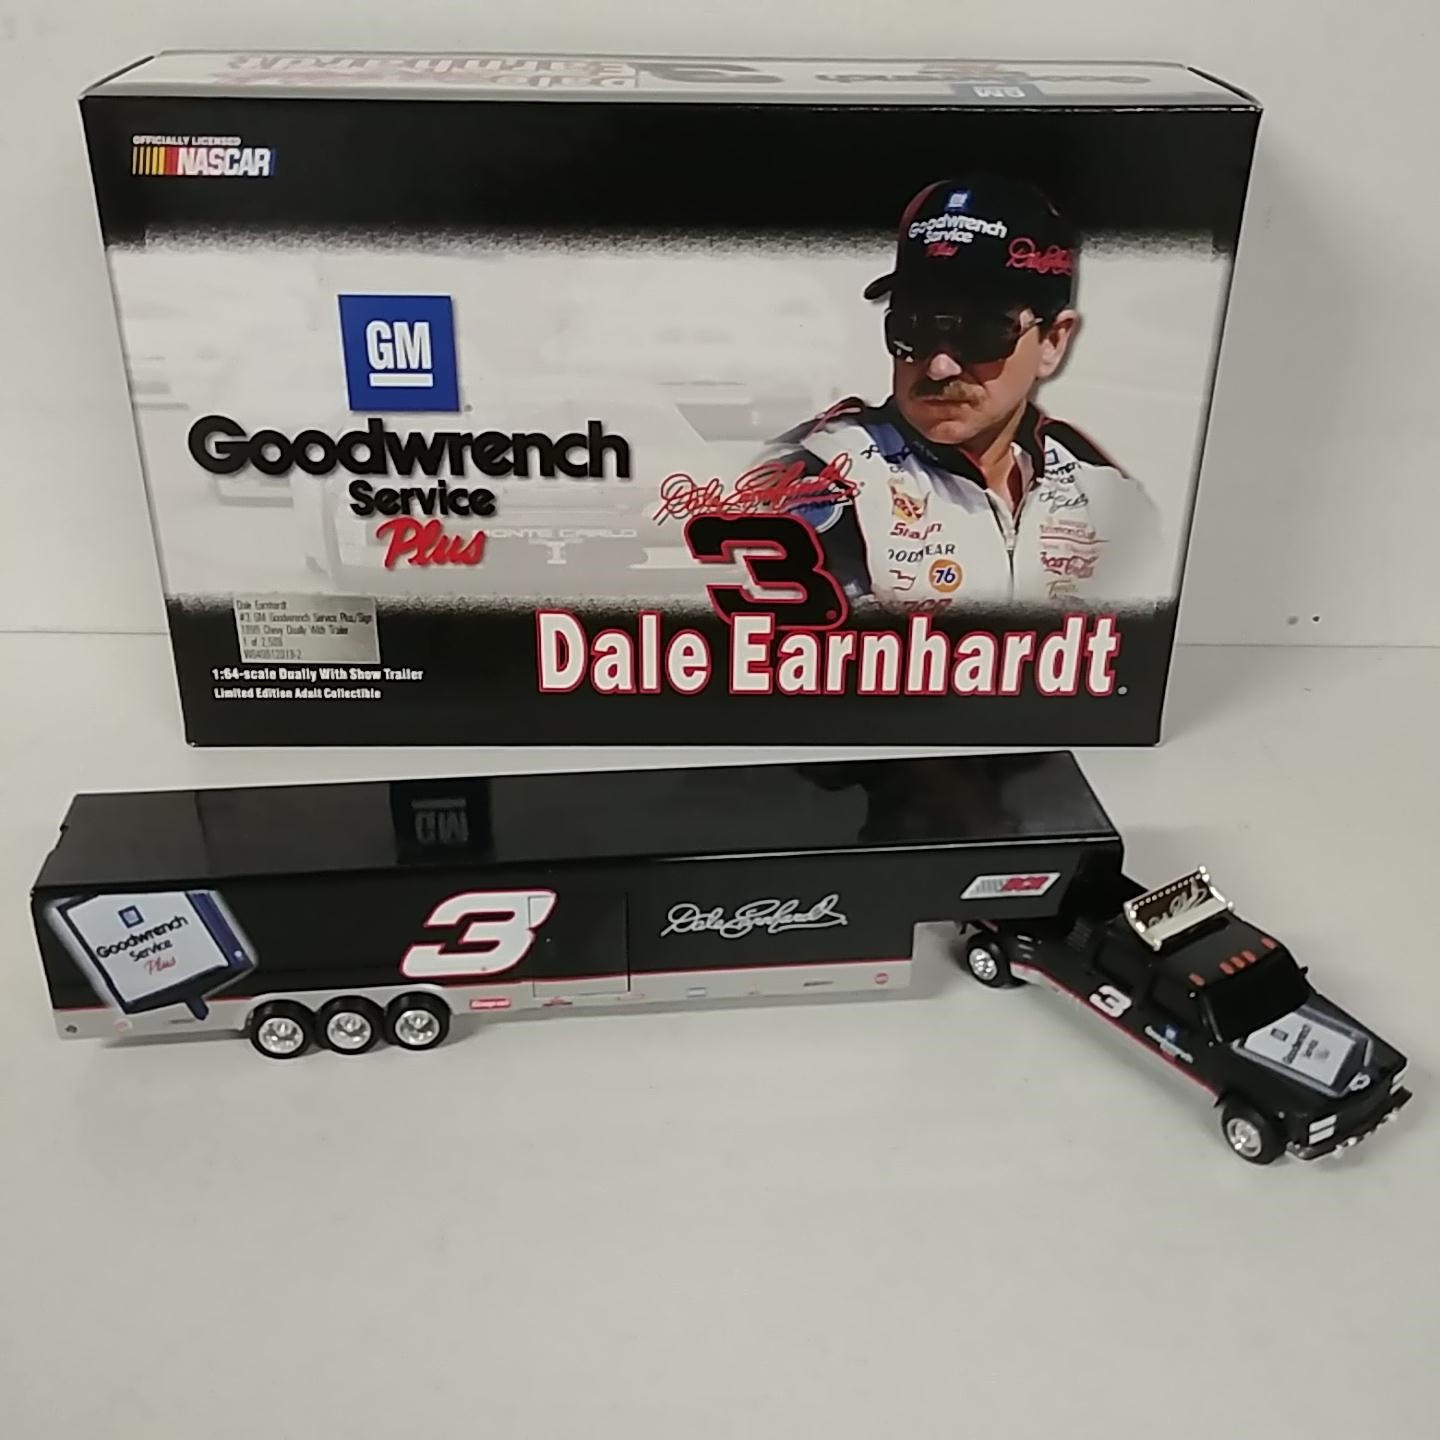 1999 Dale Earnhardt 1/64th GM Goodwrench Sign Dually and Trailor